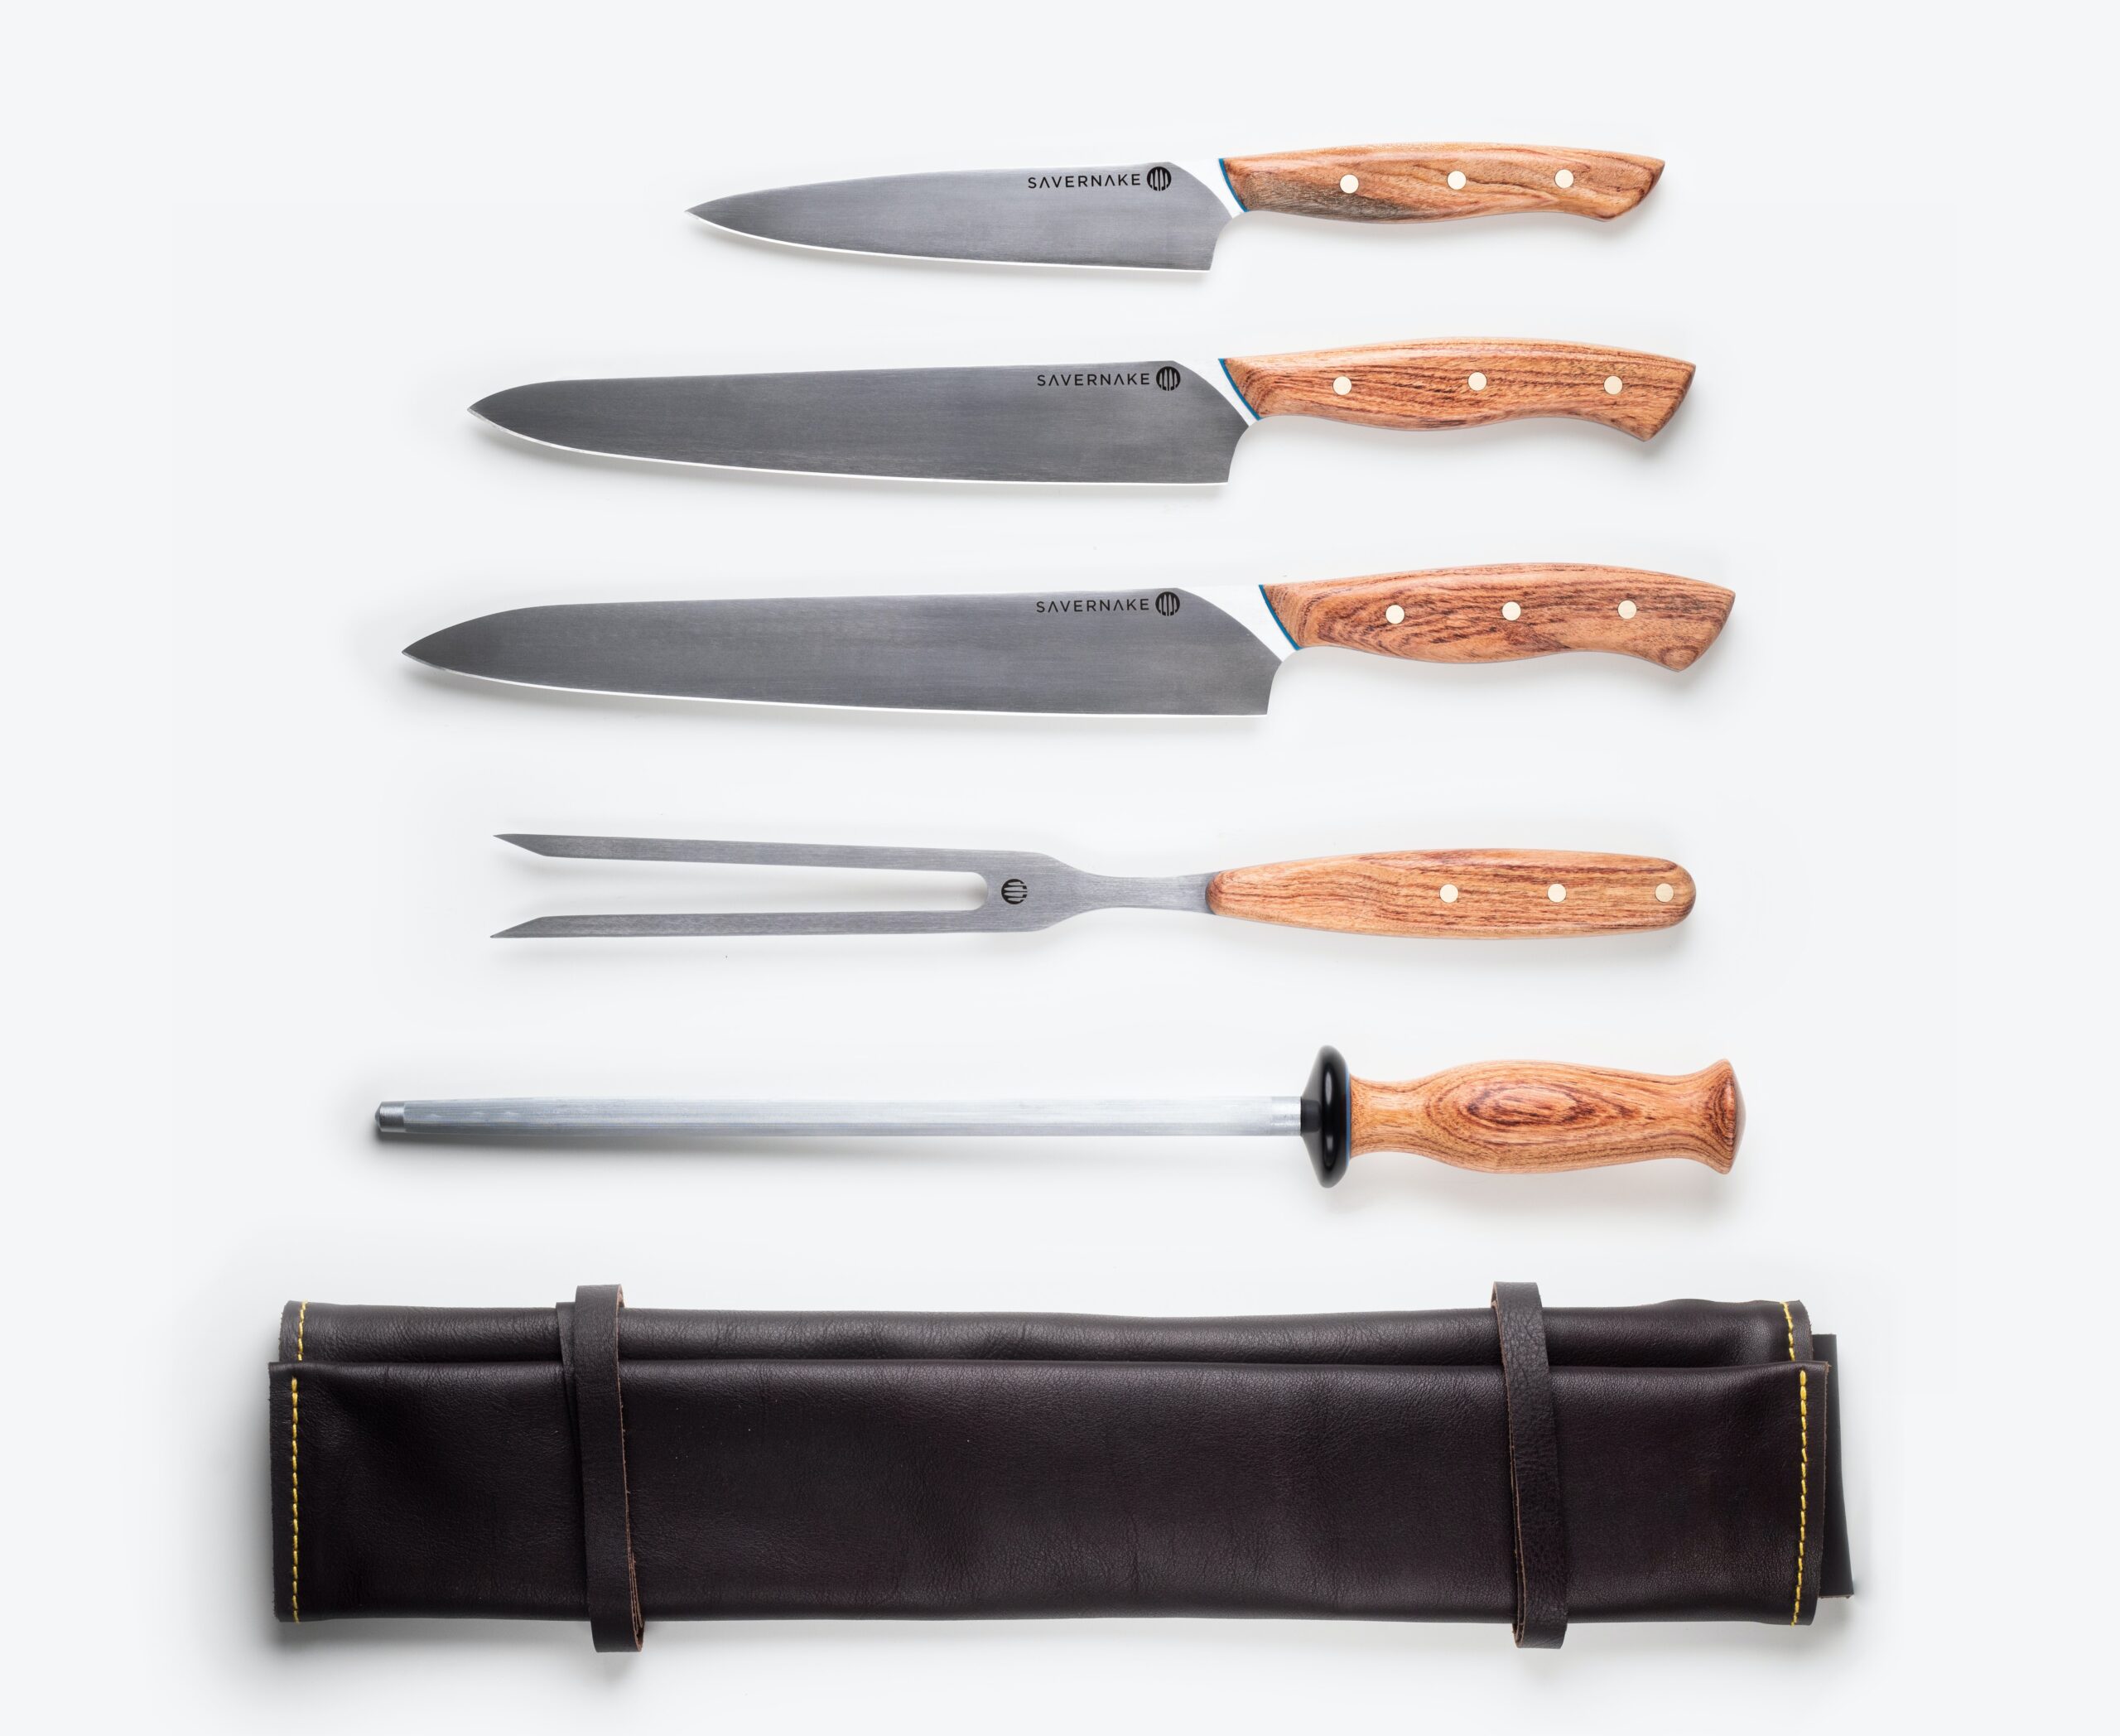 Astercook Knife Set Review: The Ultimate Chef Knife Set for Perfectly  Prepared Meals 